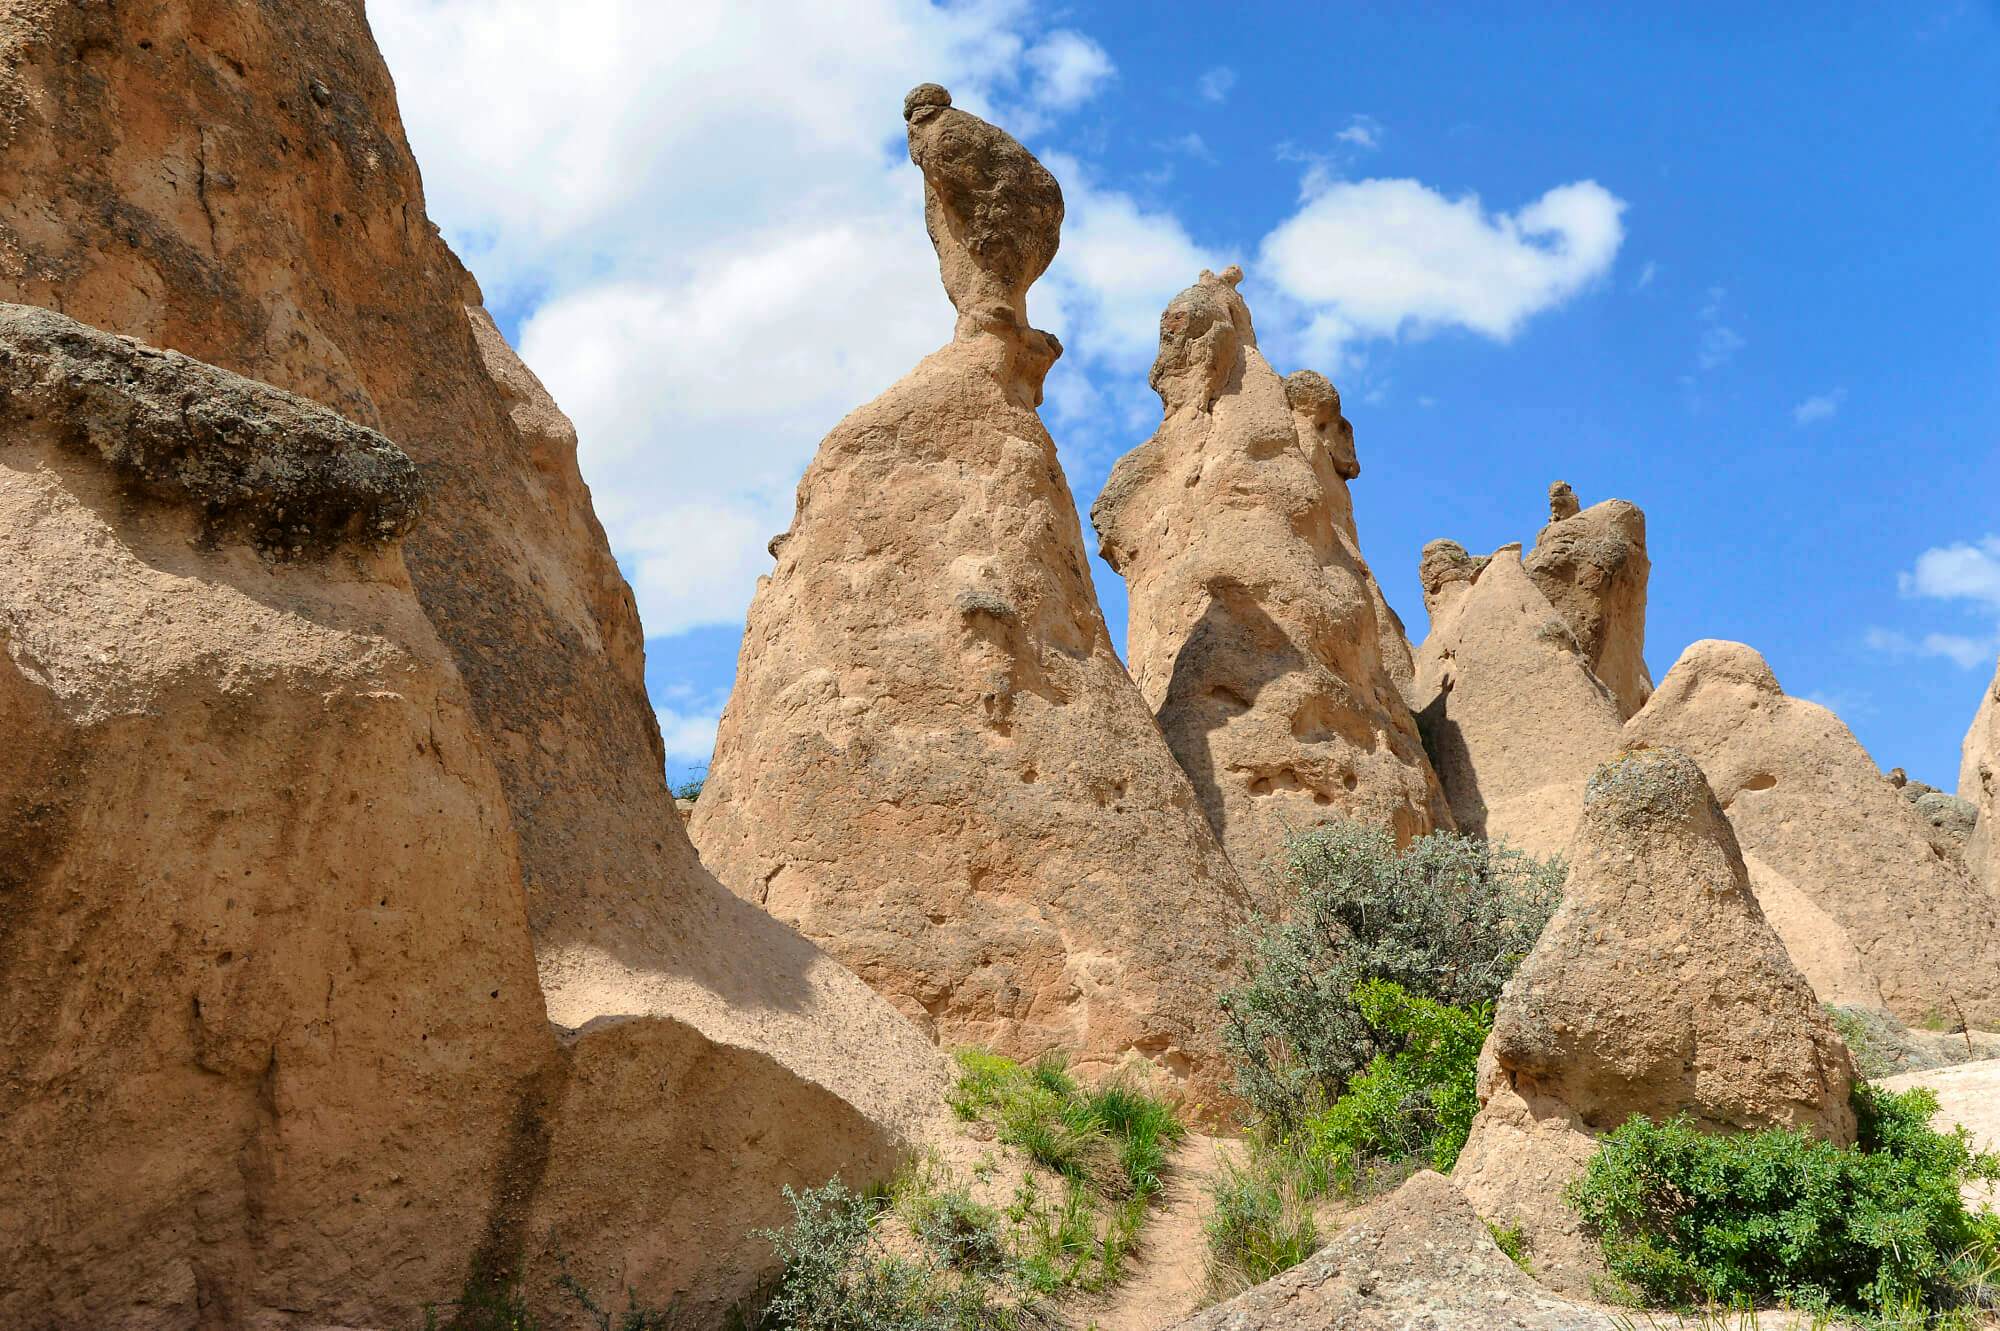 Full Day Cappadocia North Tour with Goreme Open Air Museum, Dervent Valley, Pasabag, Avanos With Shared Transfers